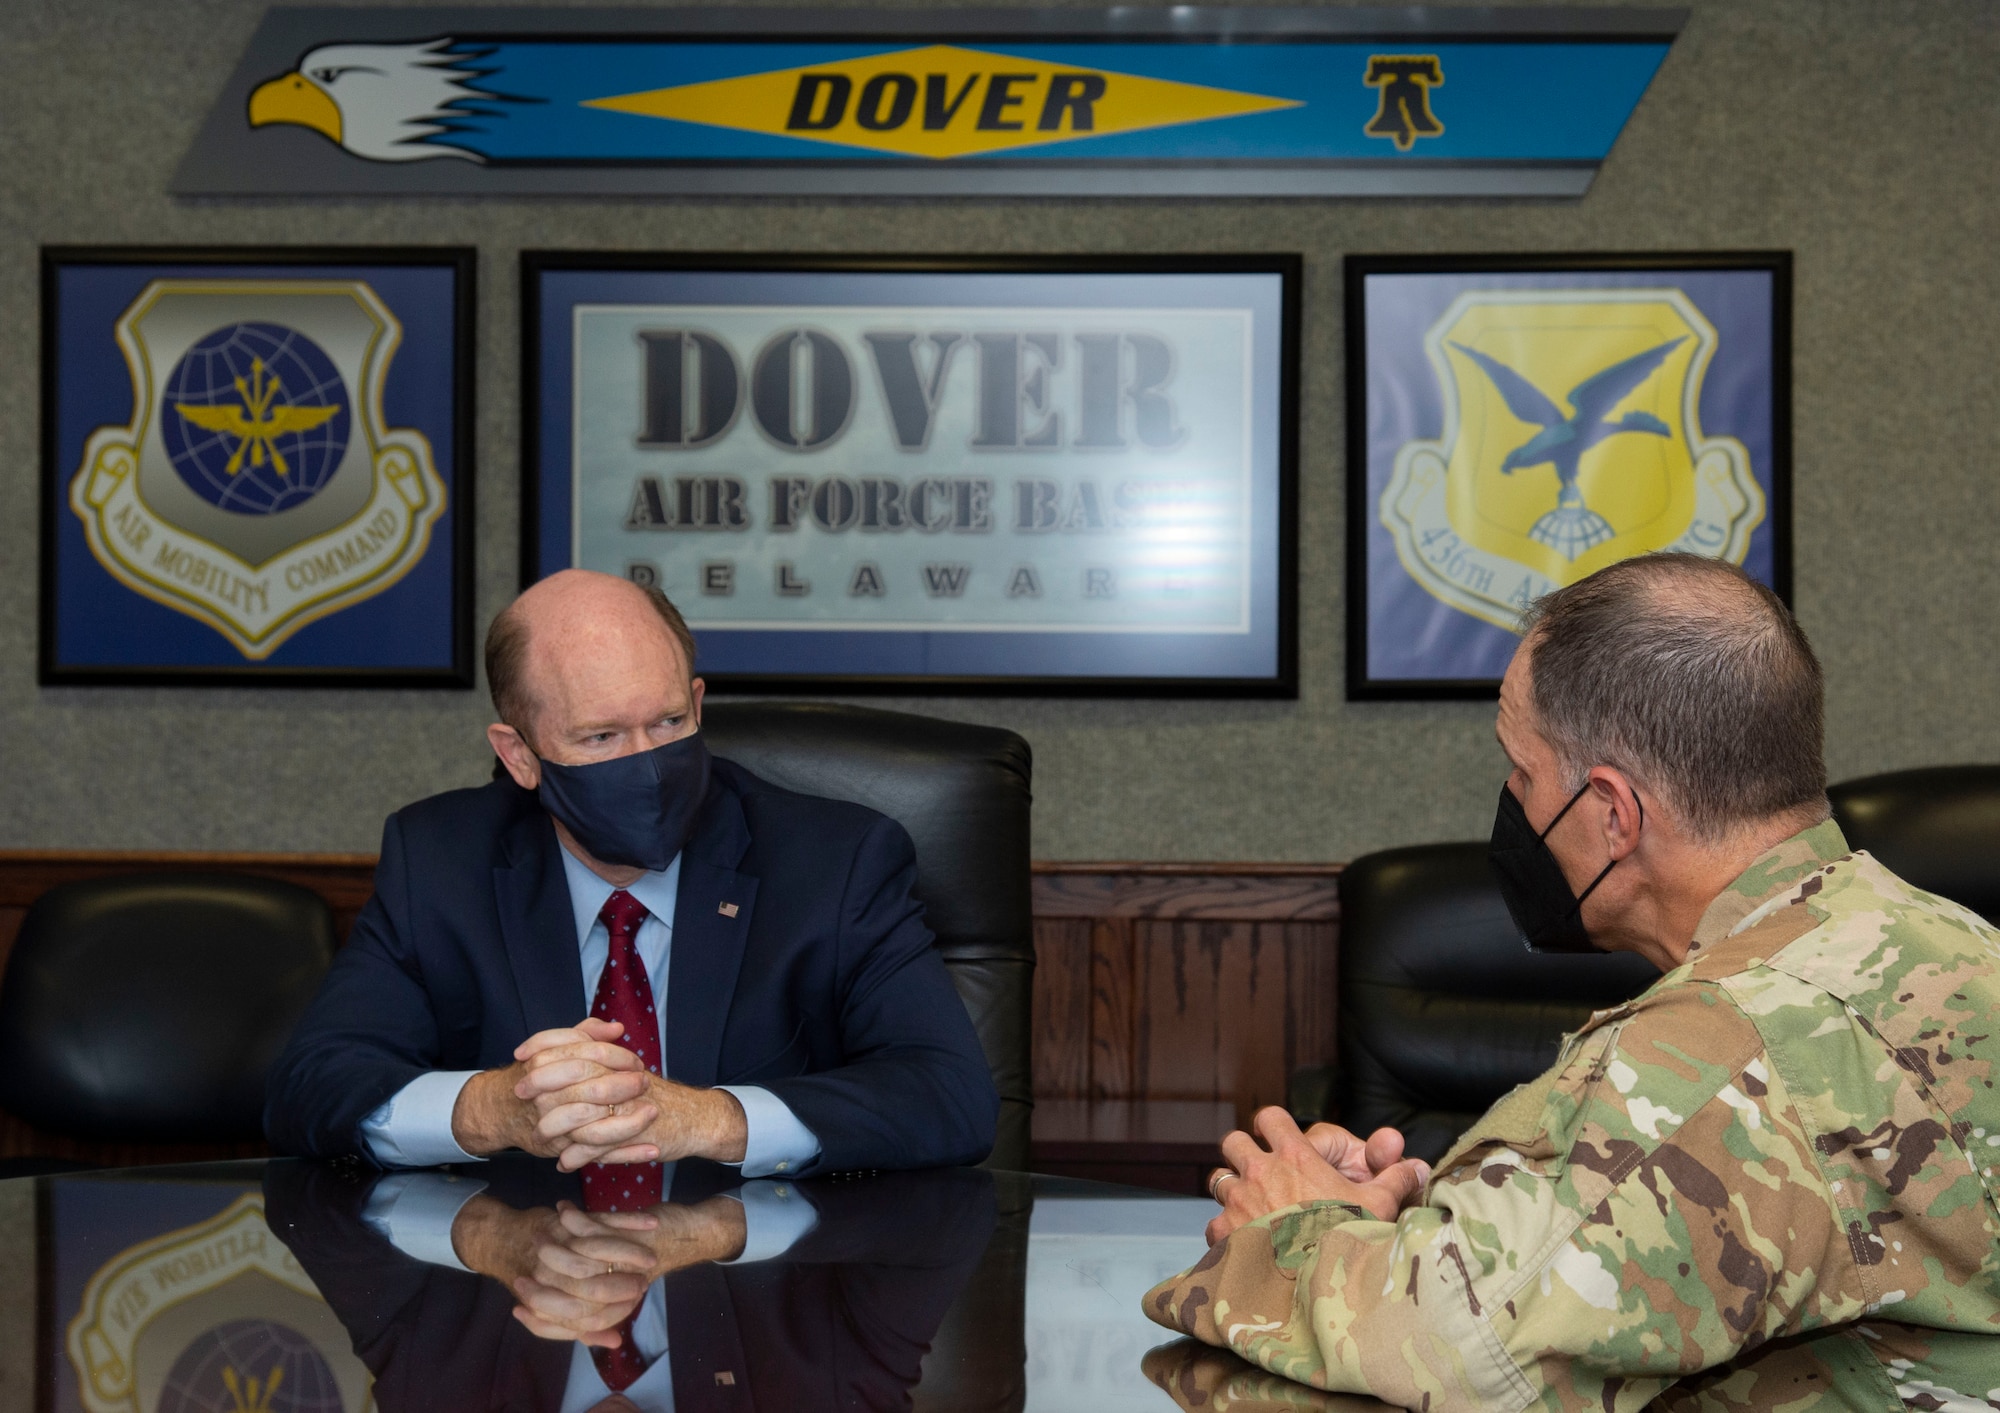 Col. Matt Husemann, right, 436th Airlift Wing commander, speaks with U.S. Sen. Chris Coons at Dover Air Force Base, Delaware, Oct. 15, 2021. Coons visited the base to meet with Airmen from various career fields who deployed during Operation Allies Refuge, as well as personnel from the 436th Civil Engineer Squadron fire department. (U.S. Air Force photo by Roland Balik)